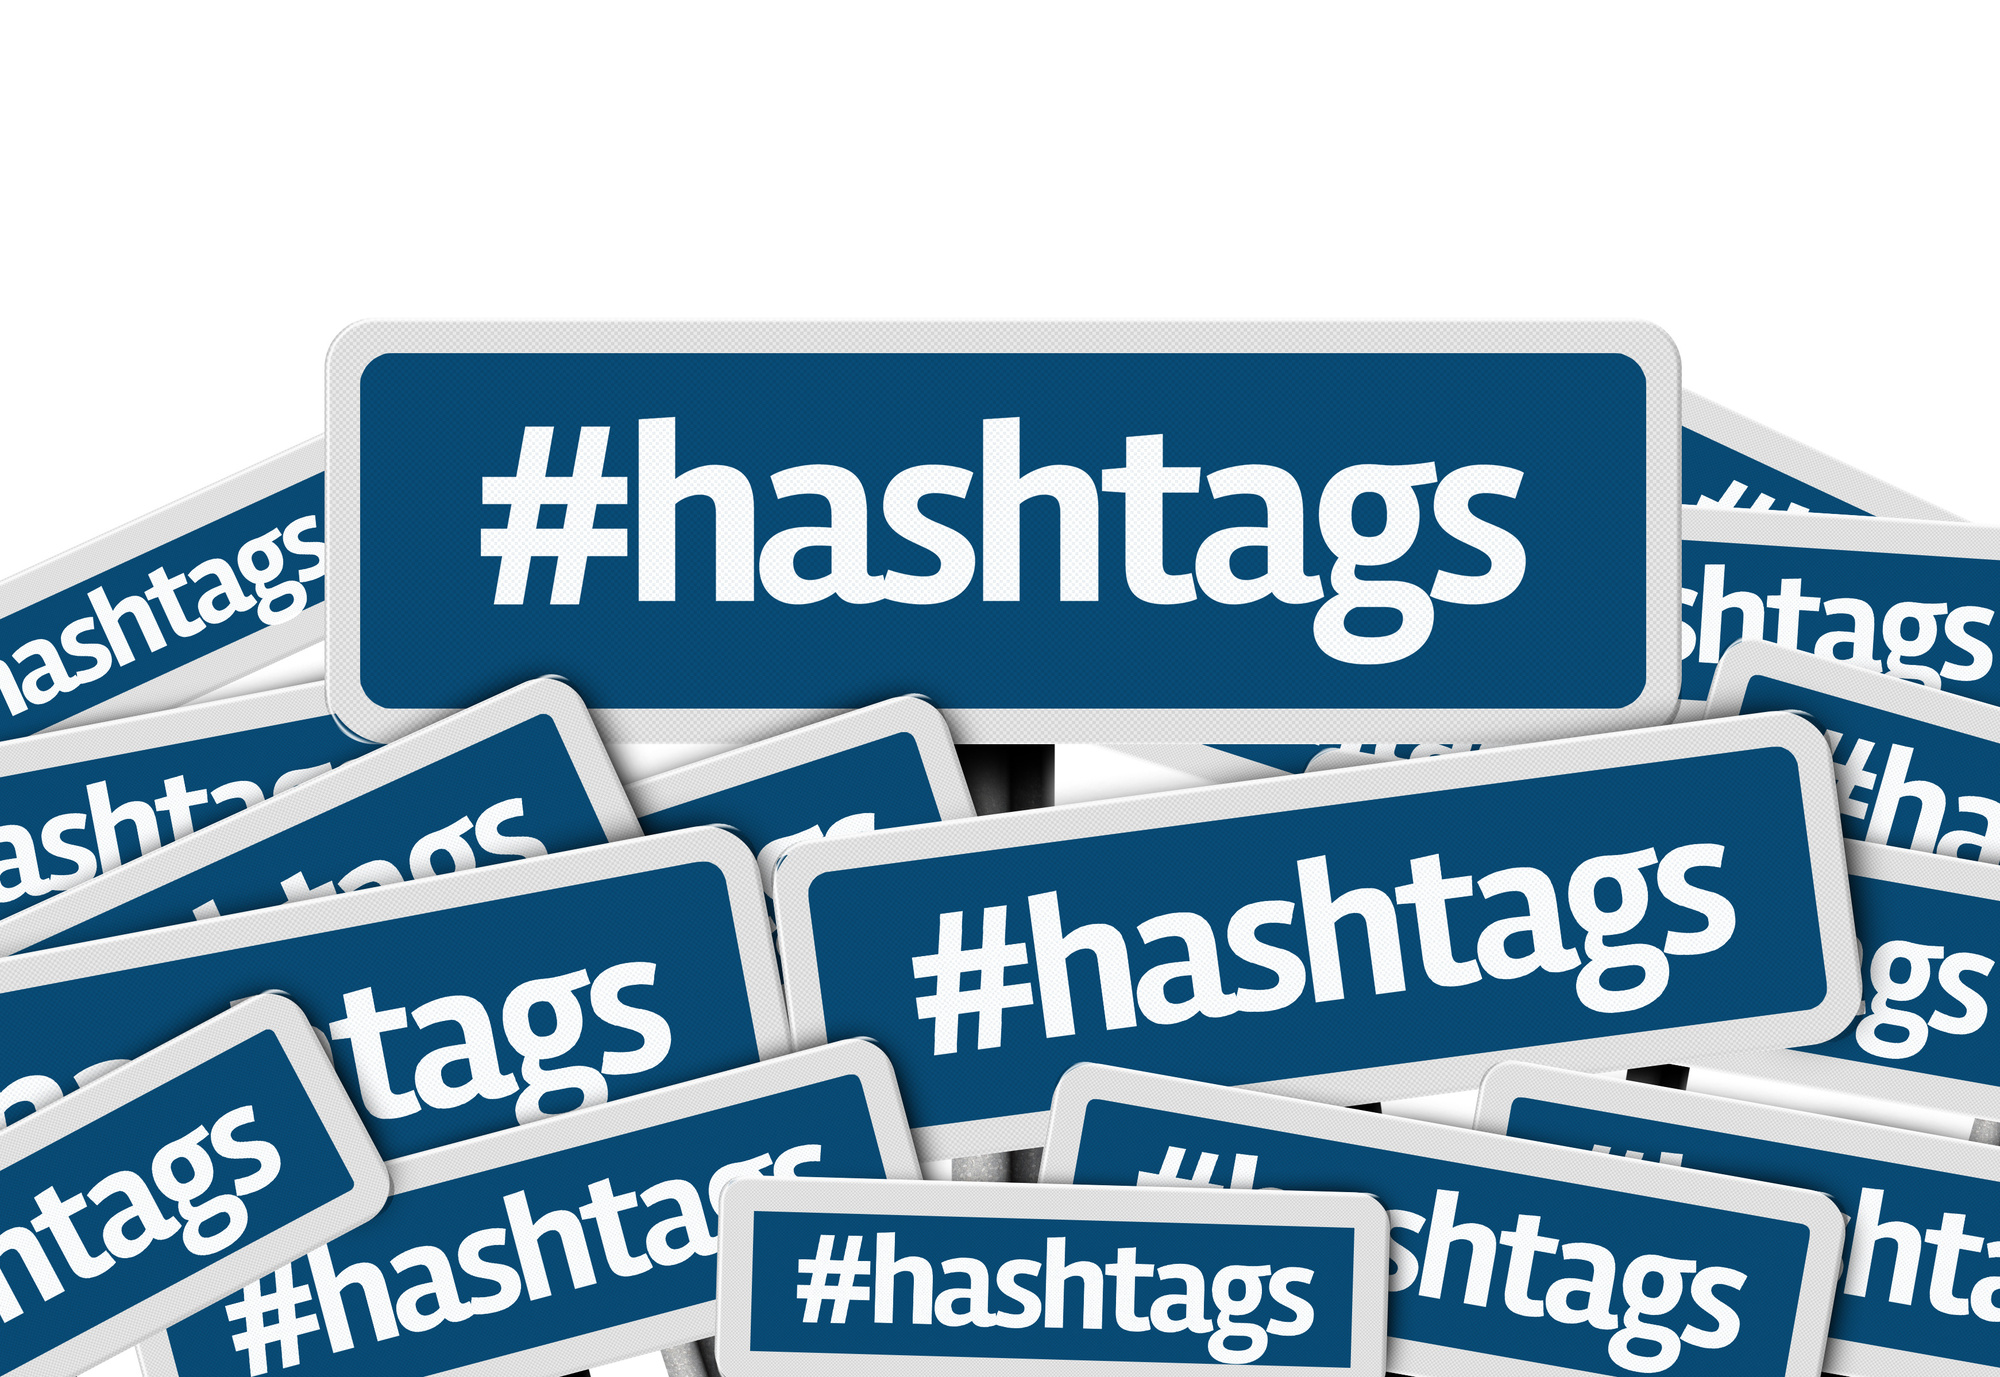 When Should You Use Facebook Hashtags